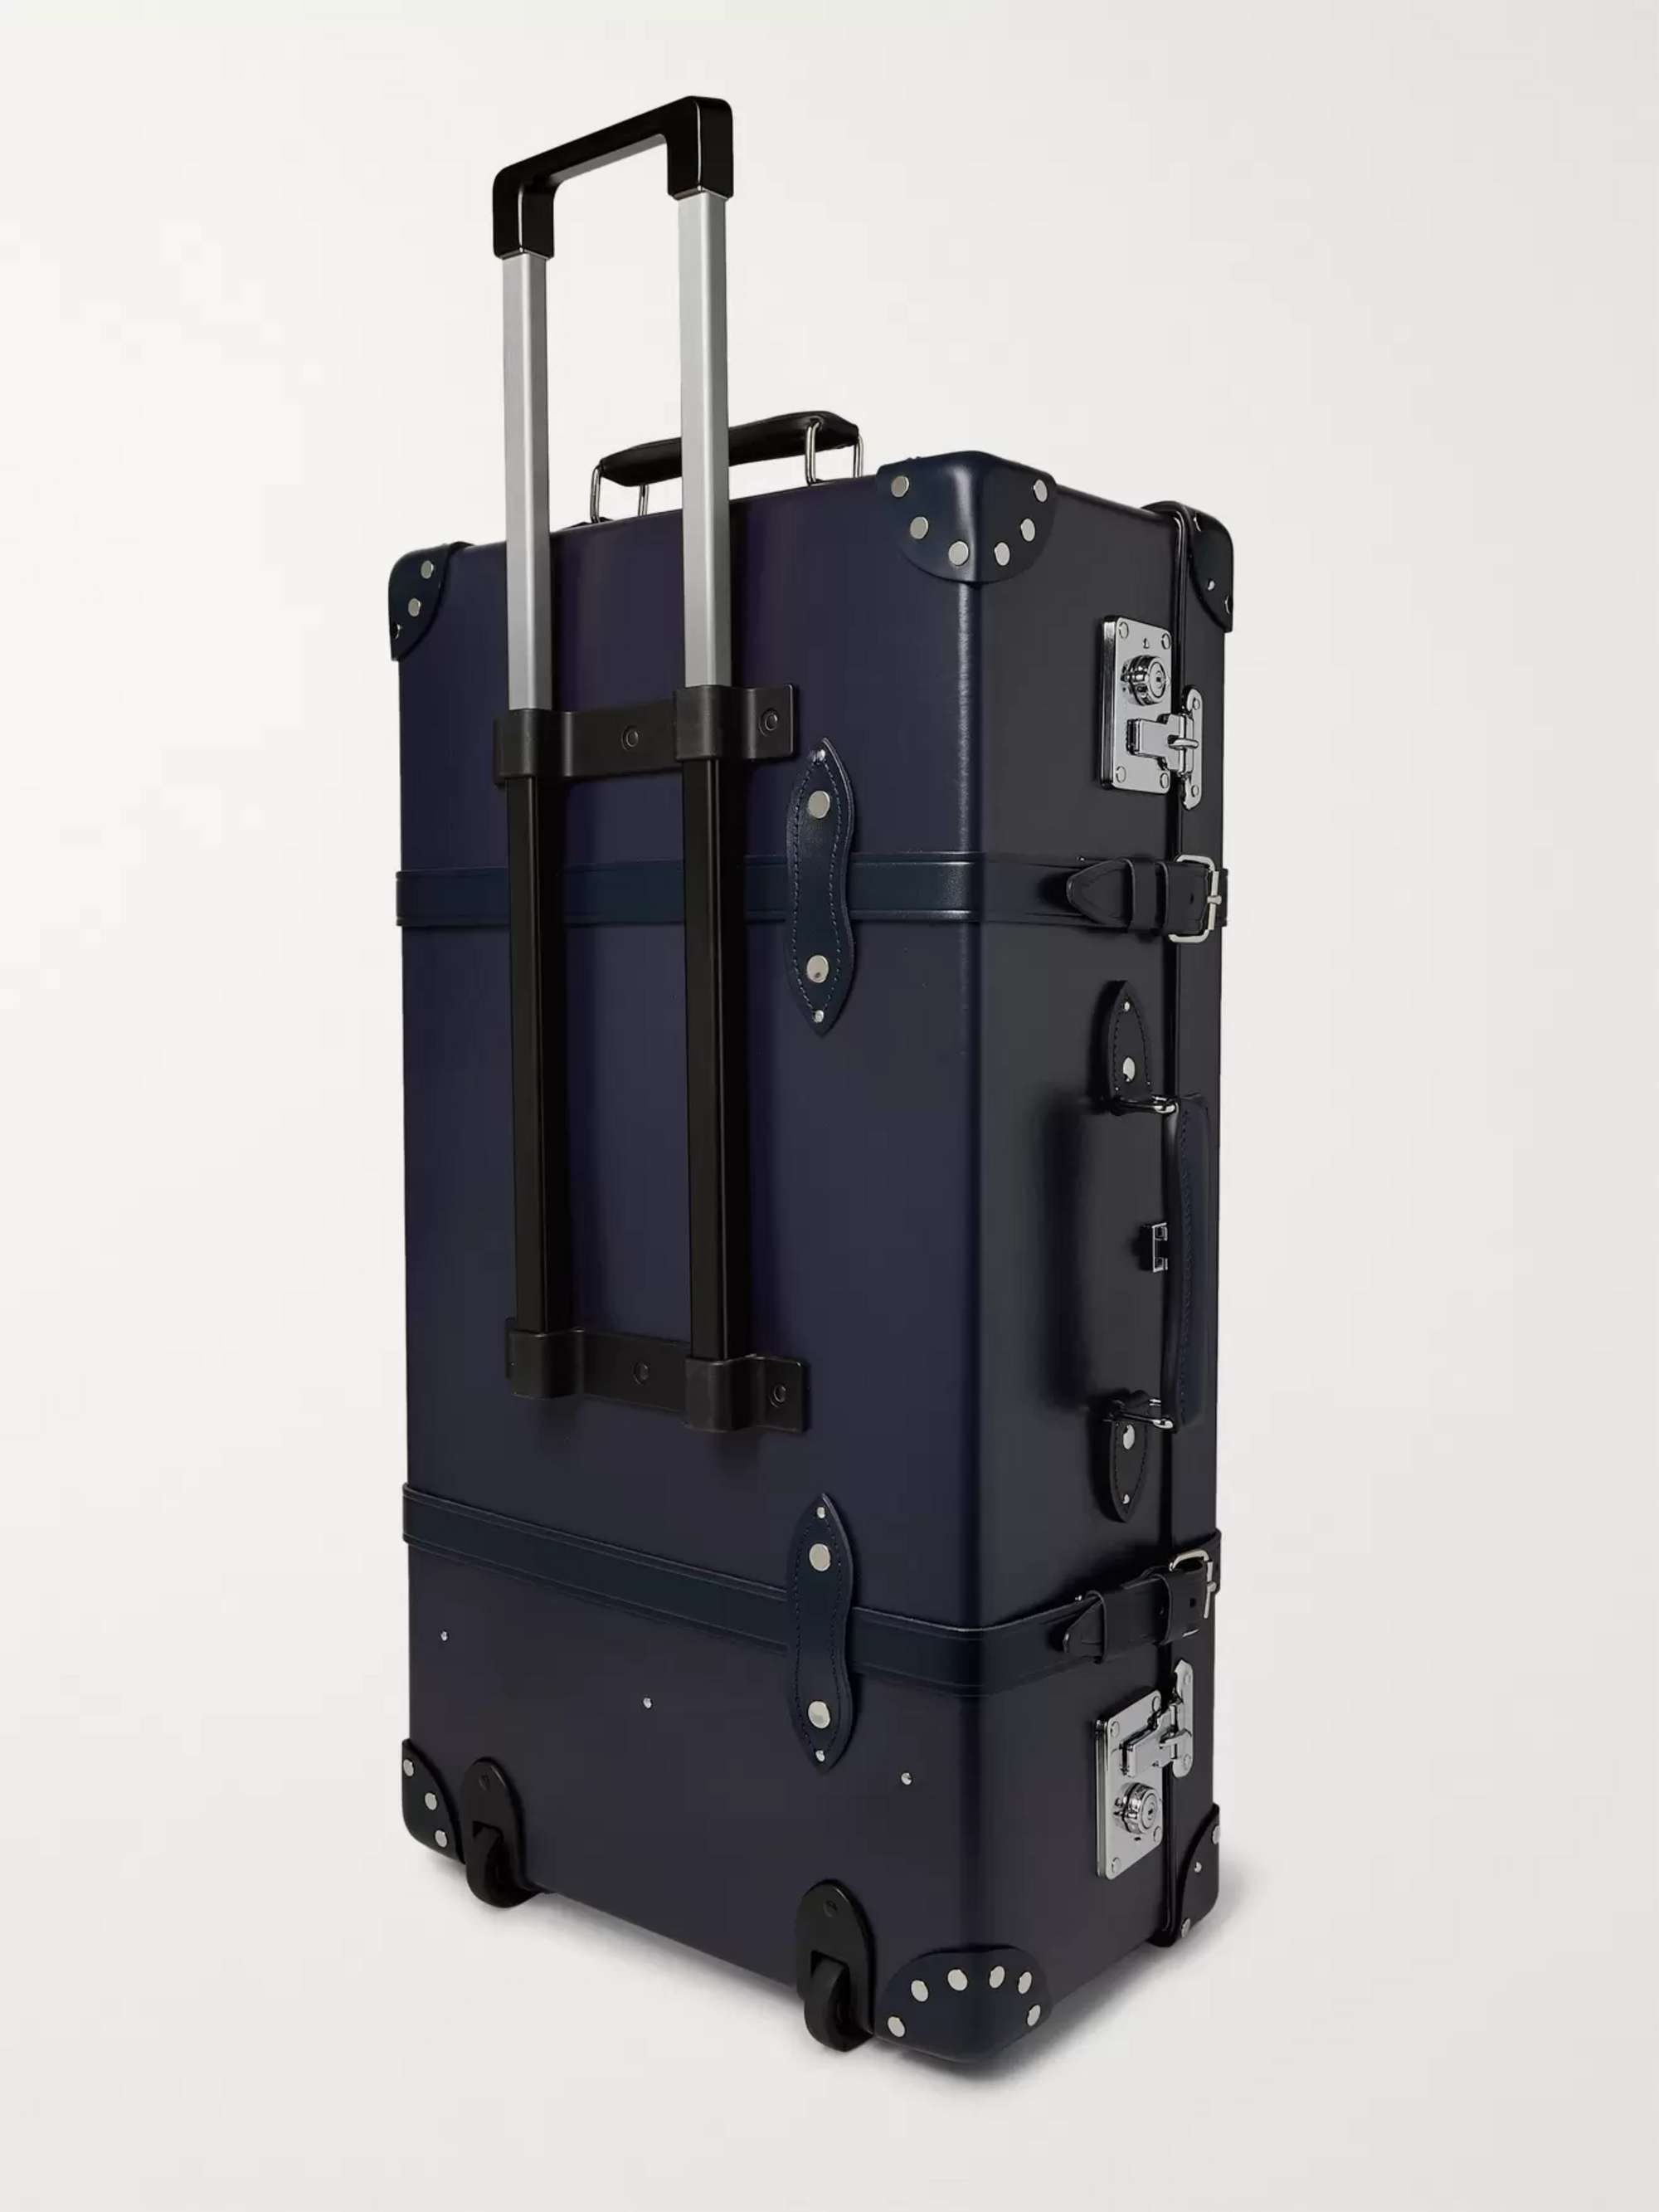 GLOBE-TROTTER 30" Leather-Trimmed Trolley Case